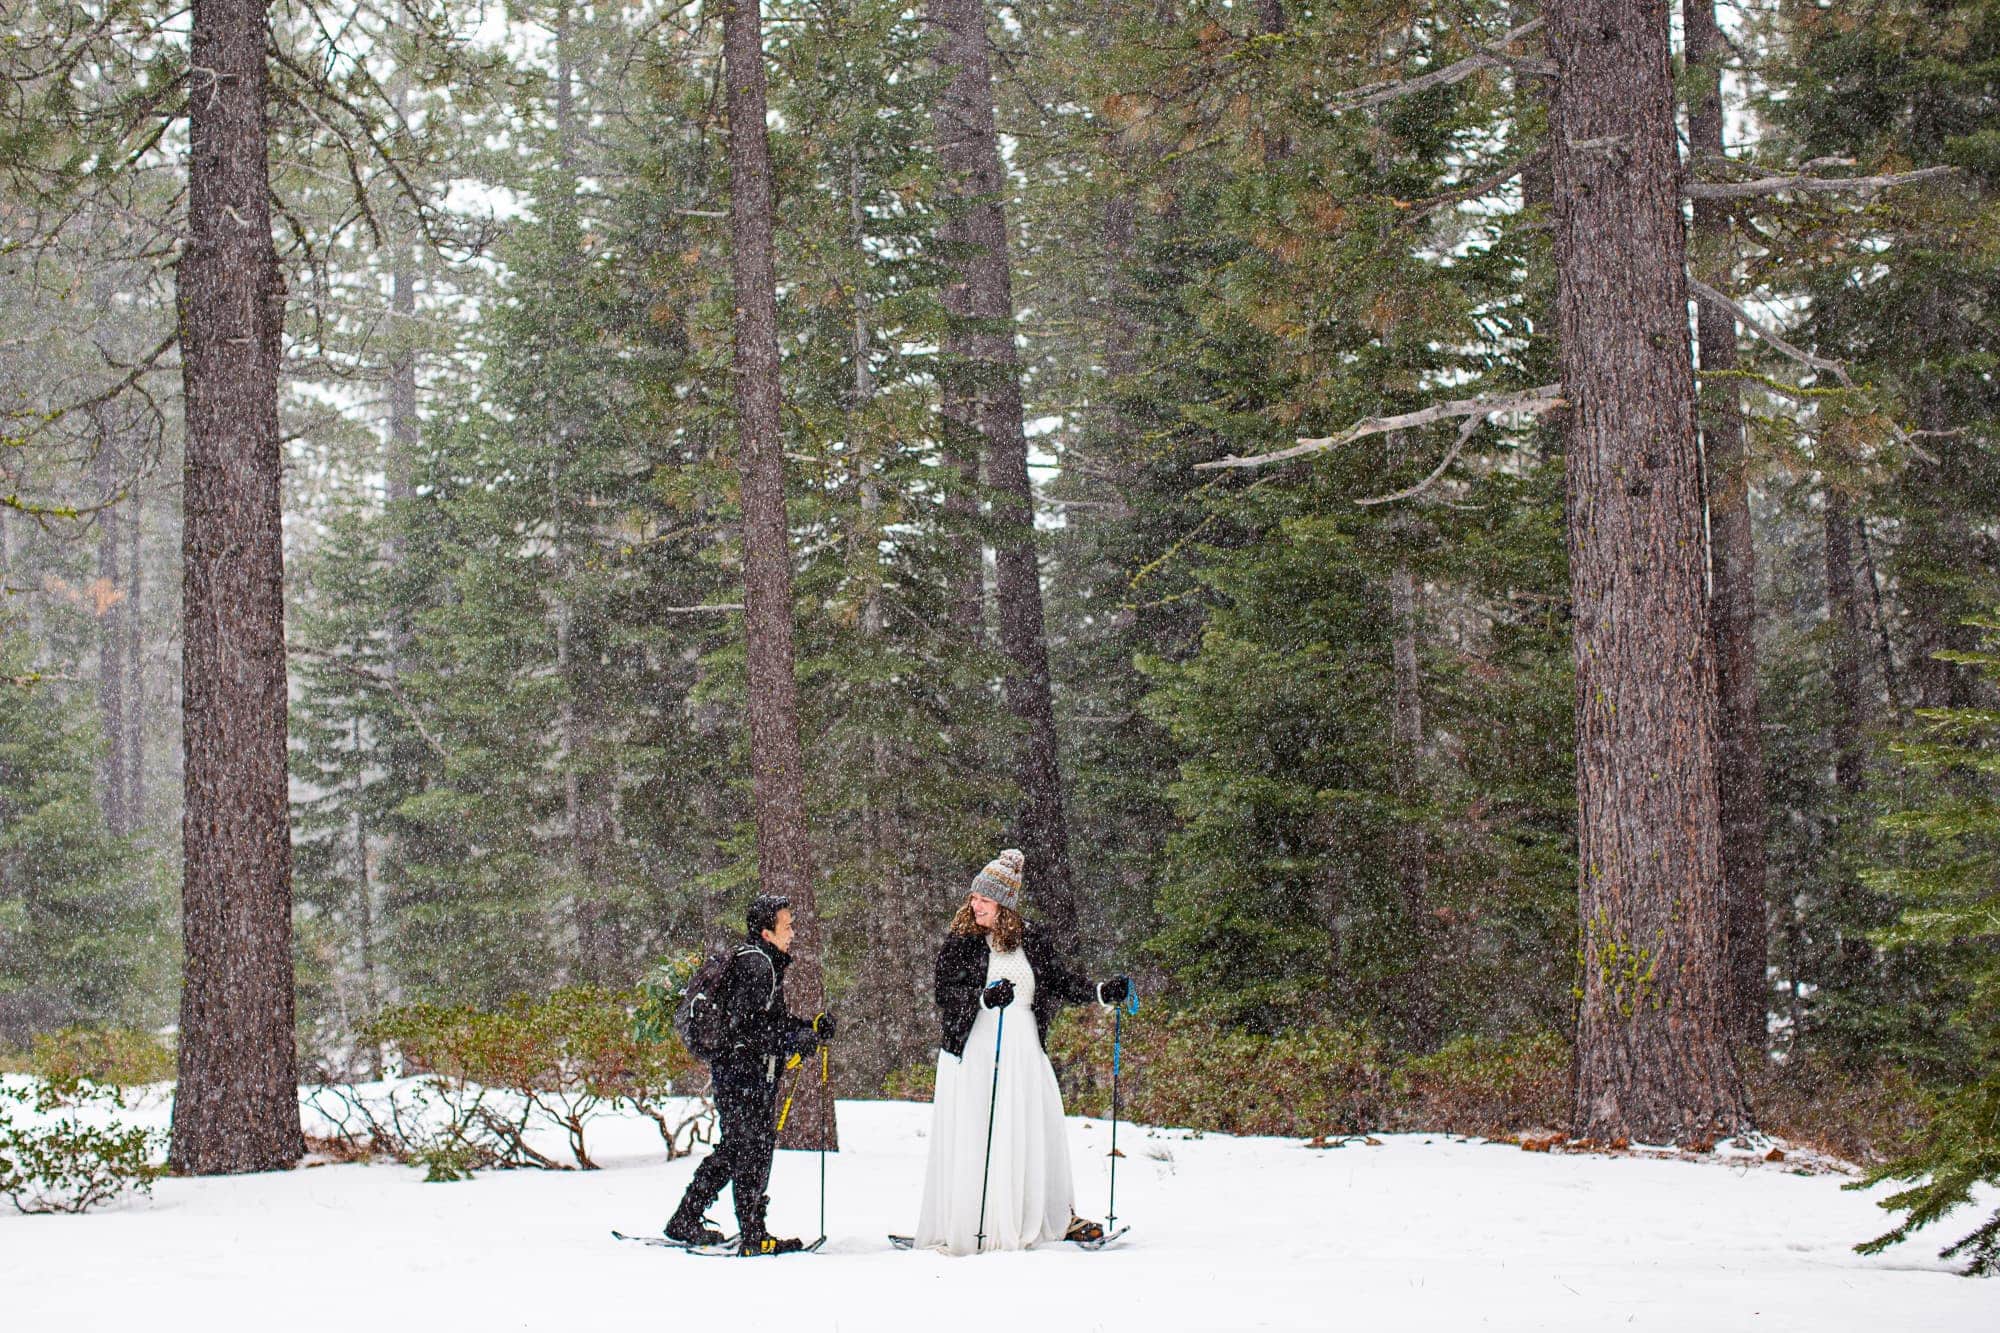 Bride and groom snowshoeing in wedding clothes in a snow filled forest in Tahoe